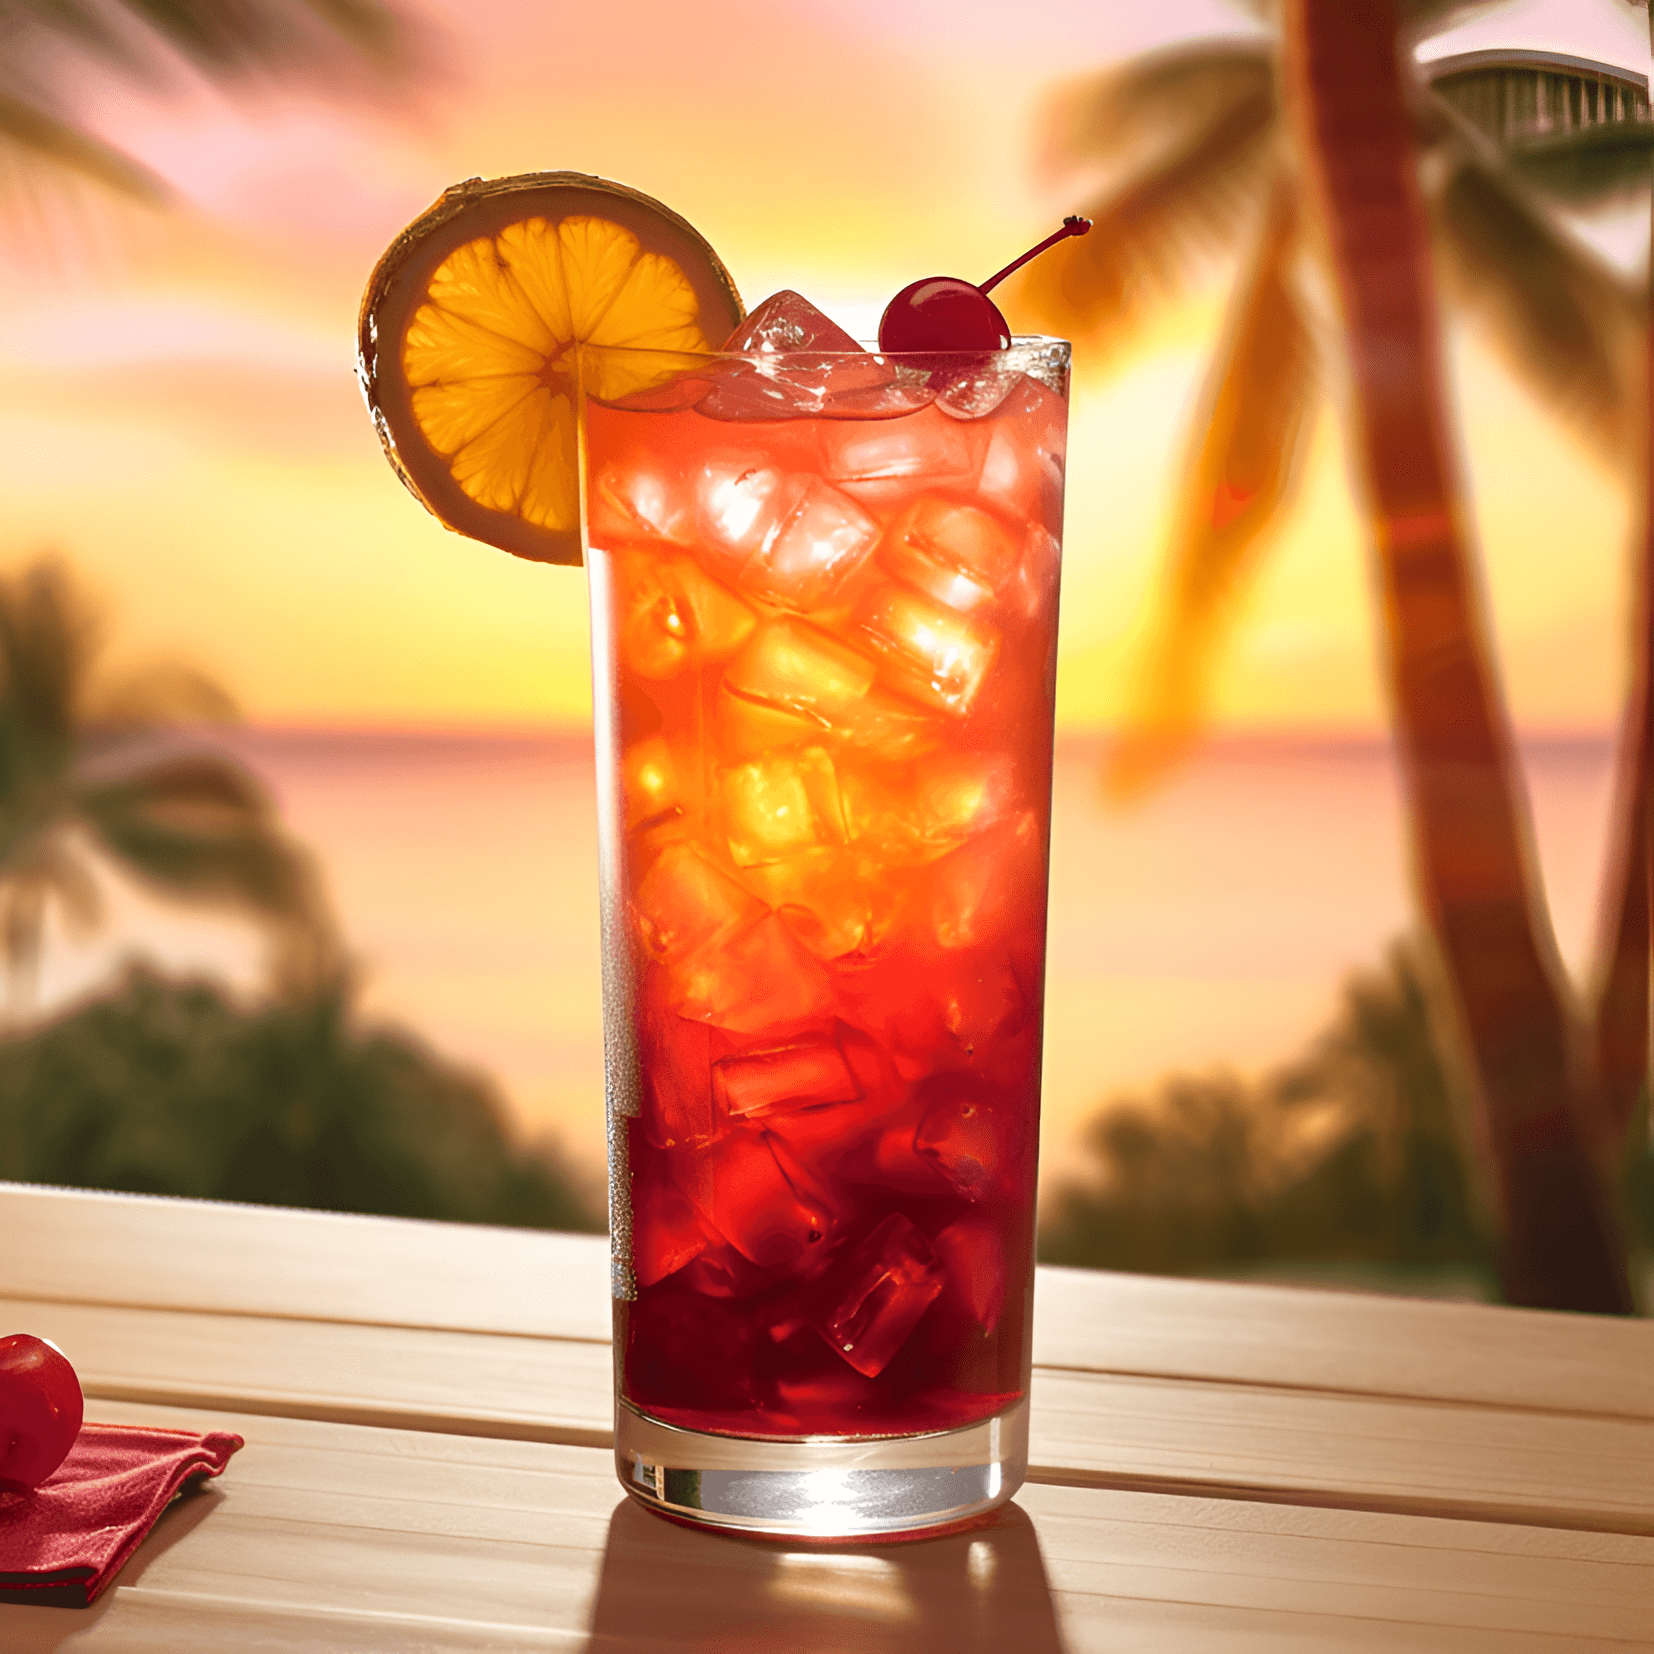 Madras Cocktail Recipe - The Madras cocktail has a sweet and tangy taste, with a hint of tartness from the cranberry juice. The orange juice adds a refreshing citrus flavor, while the vodka provides a subtle kick. Overall, it is a light and fruity cocktail that is perfect for warm weather.